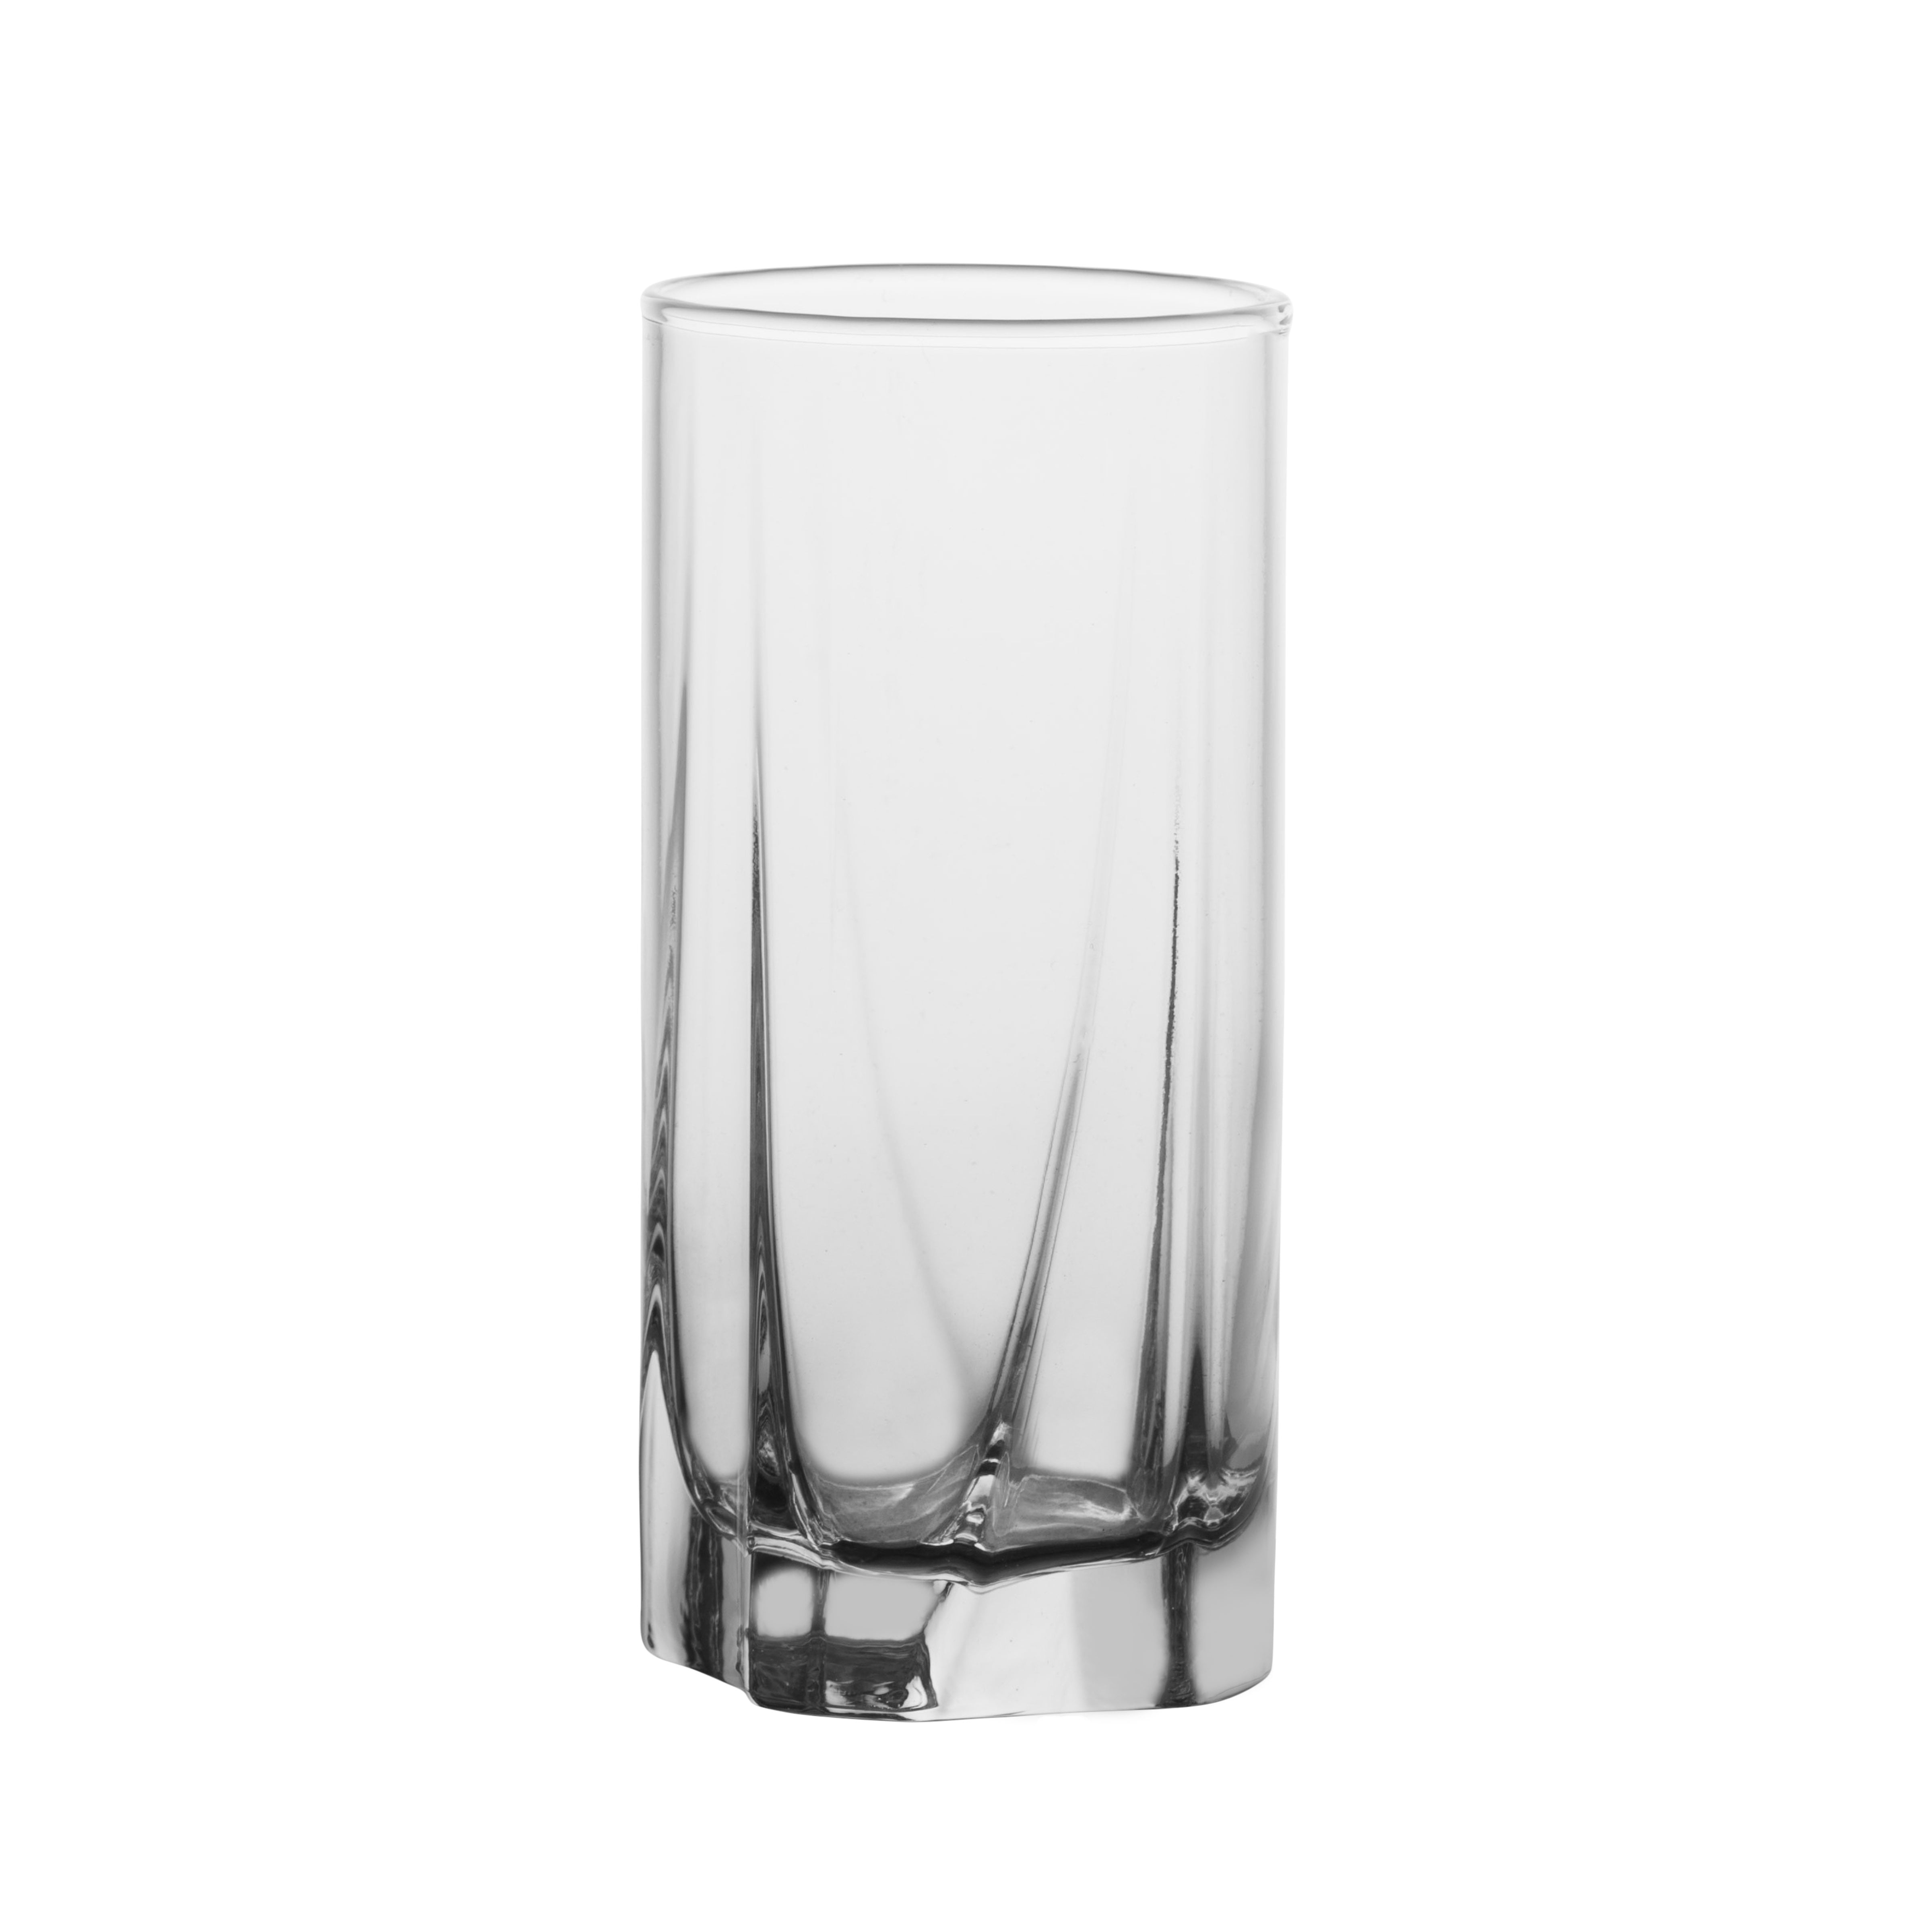 Dishwasher Safe Highball Glass Tumbler Heavy Duty Cups for Water Milk Set of 6 Clear Tall Water Glasses Vikko 11 Ounce Drinking Glasses: Thick and Durable Kitchen Glasses Juice Soda 